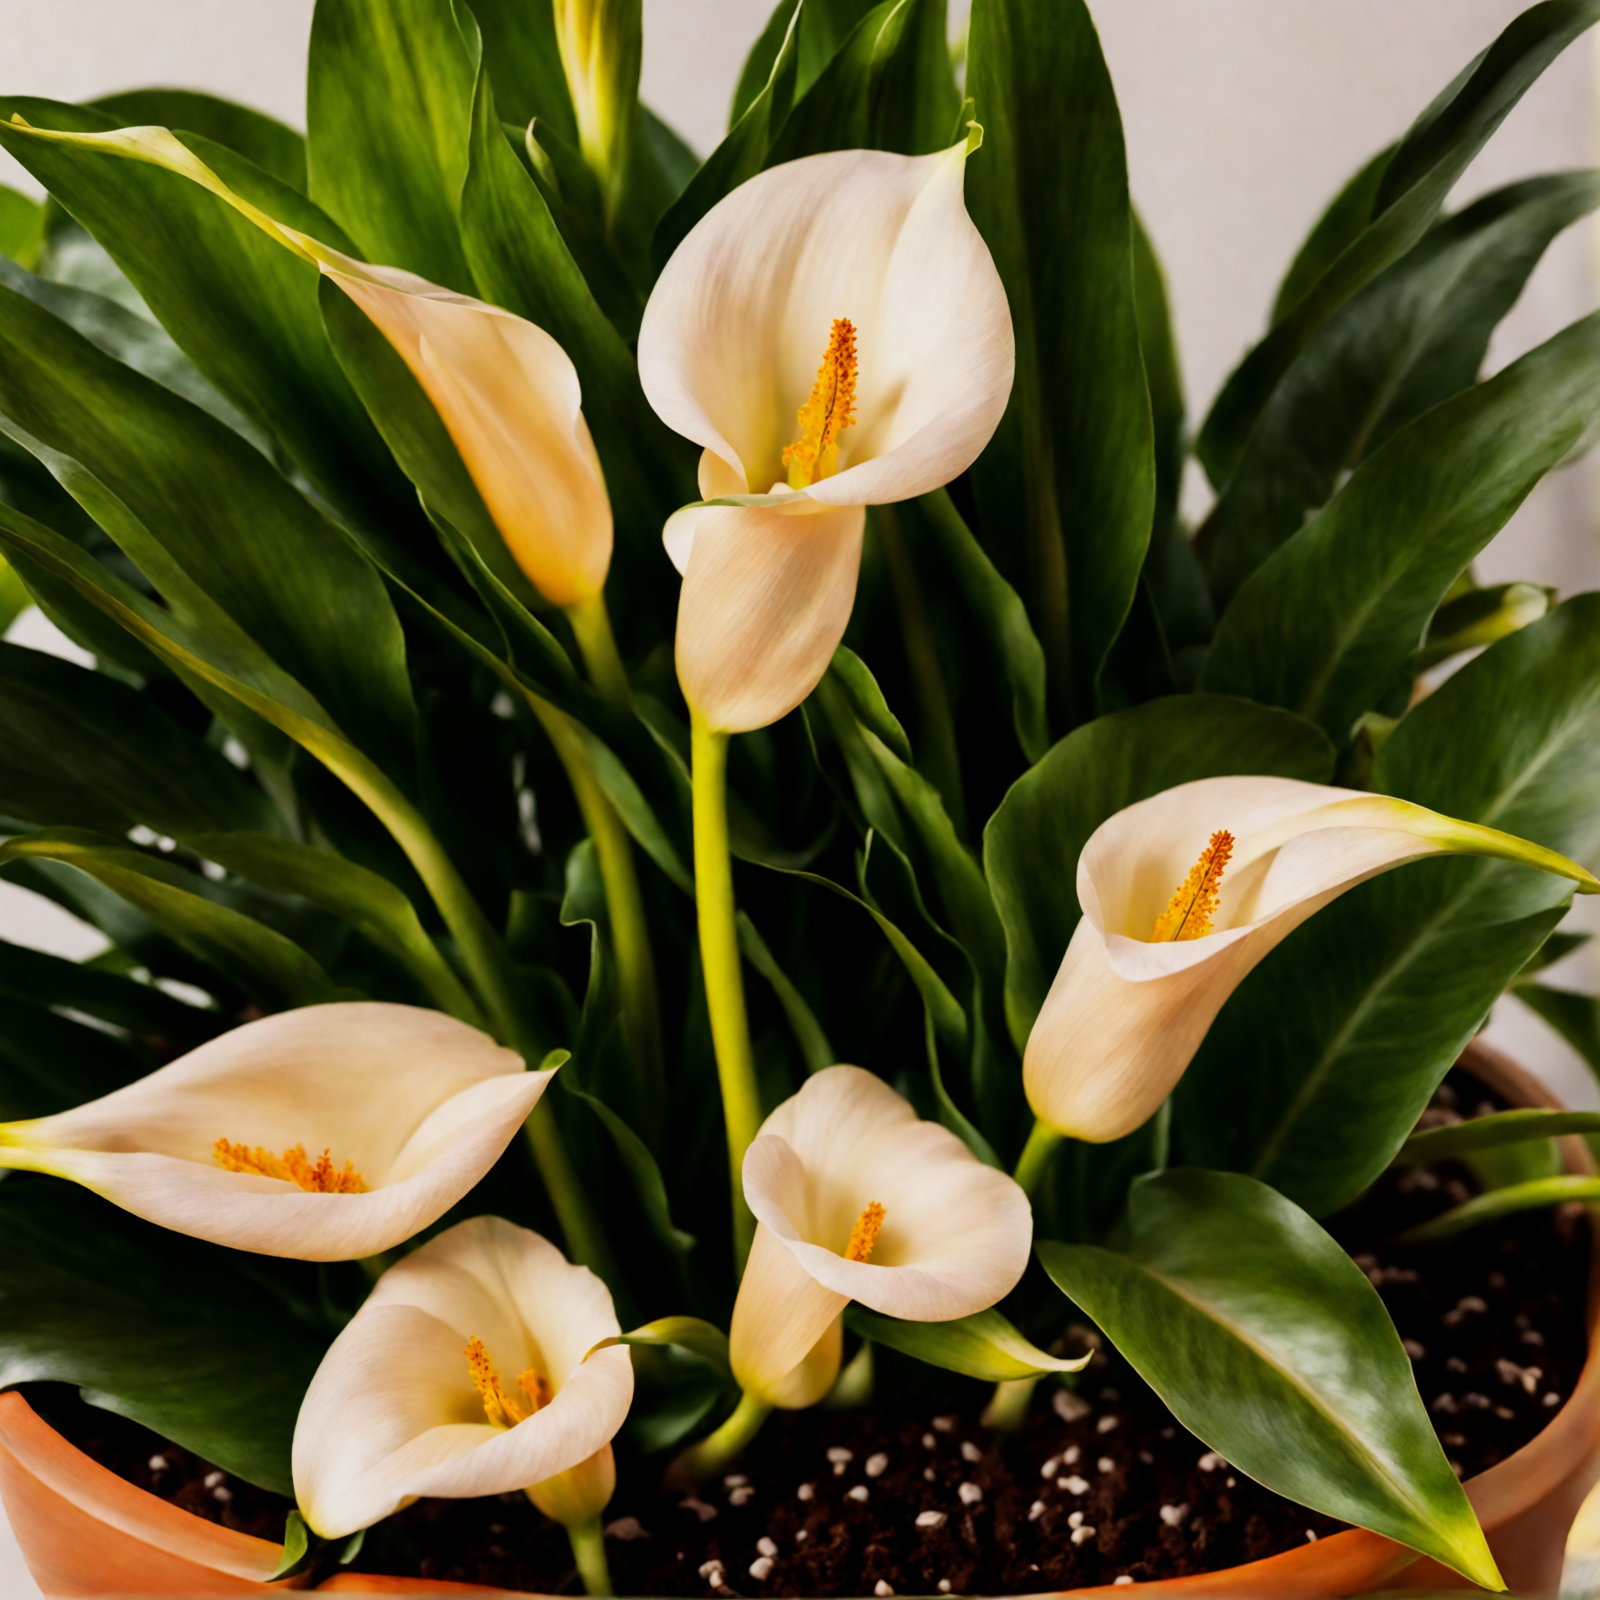 Three Zantedeschia aethiopica (calla lilies) in a bowl, with foliage backdrop, clear indoor lighting.